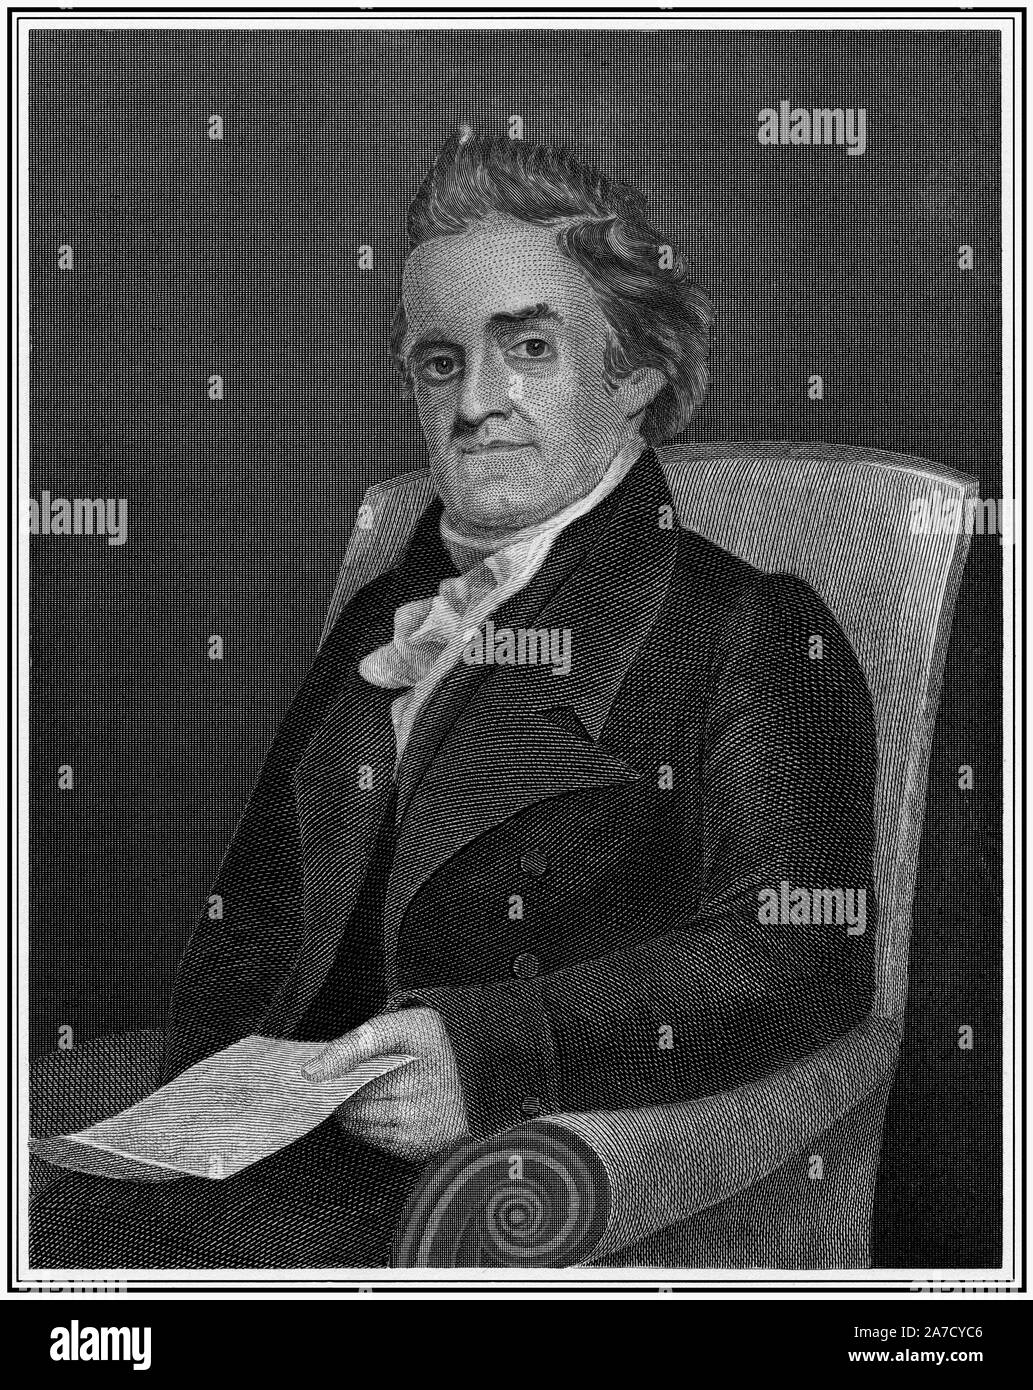 Noah Webster: American lexicographer and English-language spelling reformer. Stock Photo